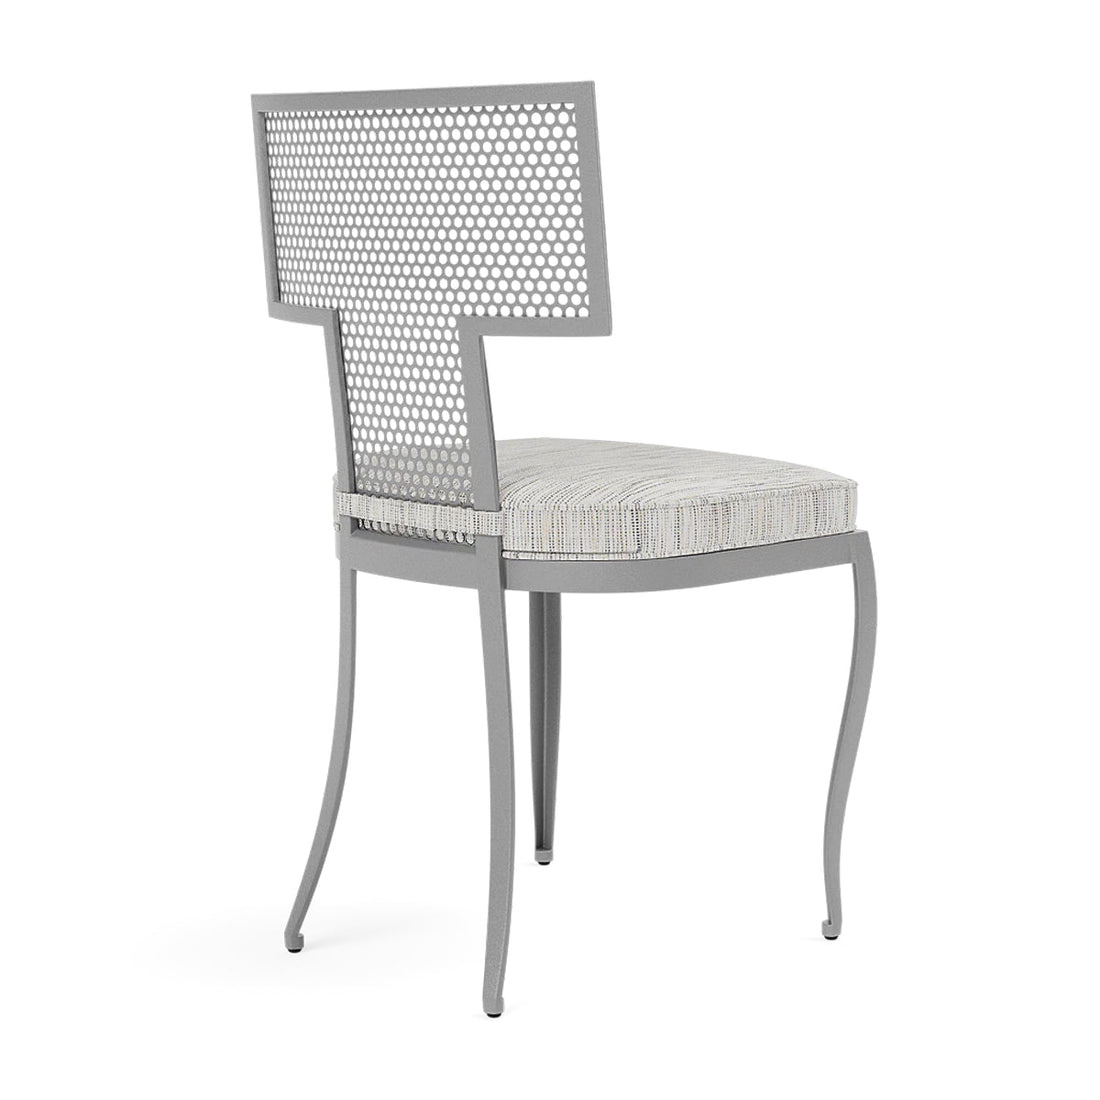 Made Goods Hadley Metal Outdoor Dining Chair in Danube Mix Beige Fabric